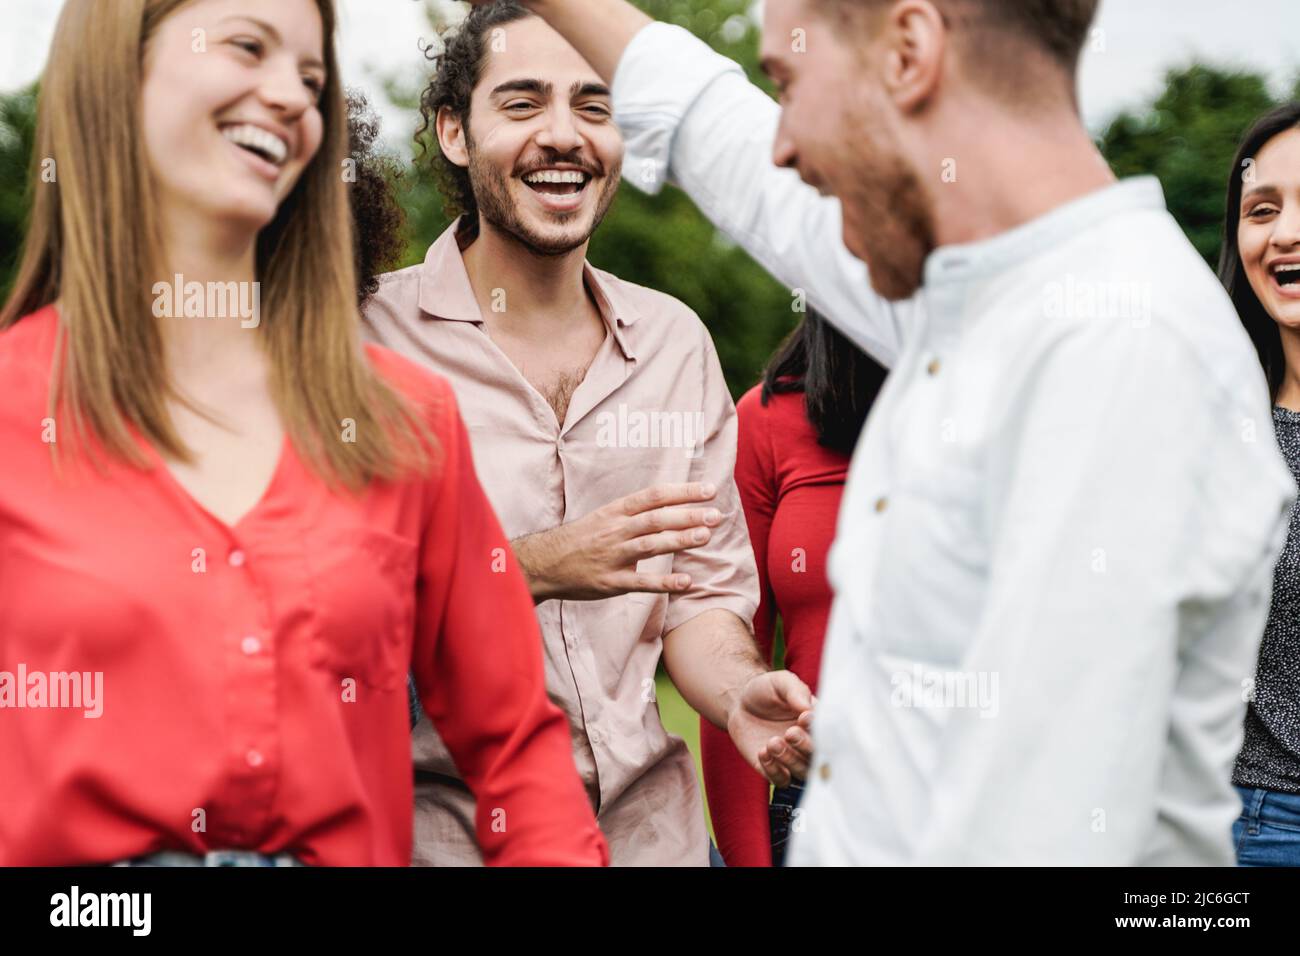 Multiethnic group of friends having fun dancing together outdoor during summer vacations - Focus on center man face Stock Photo